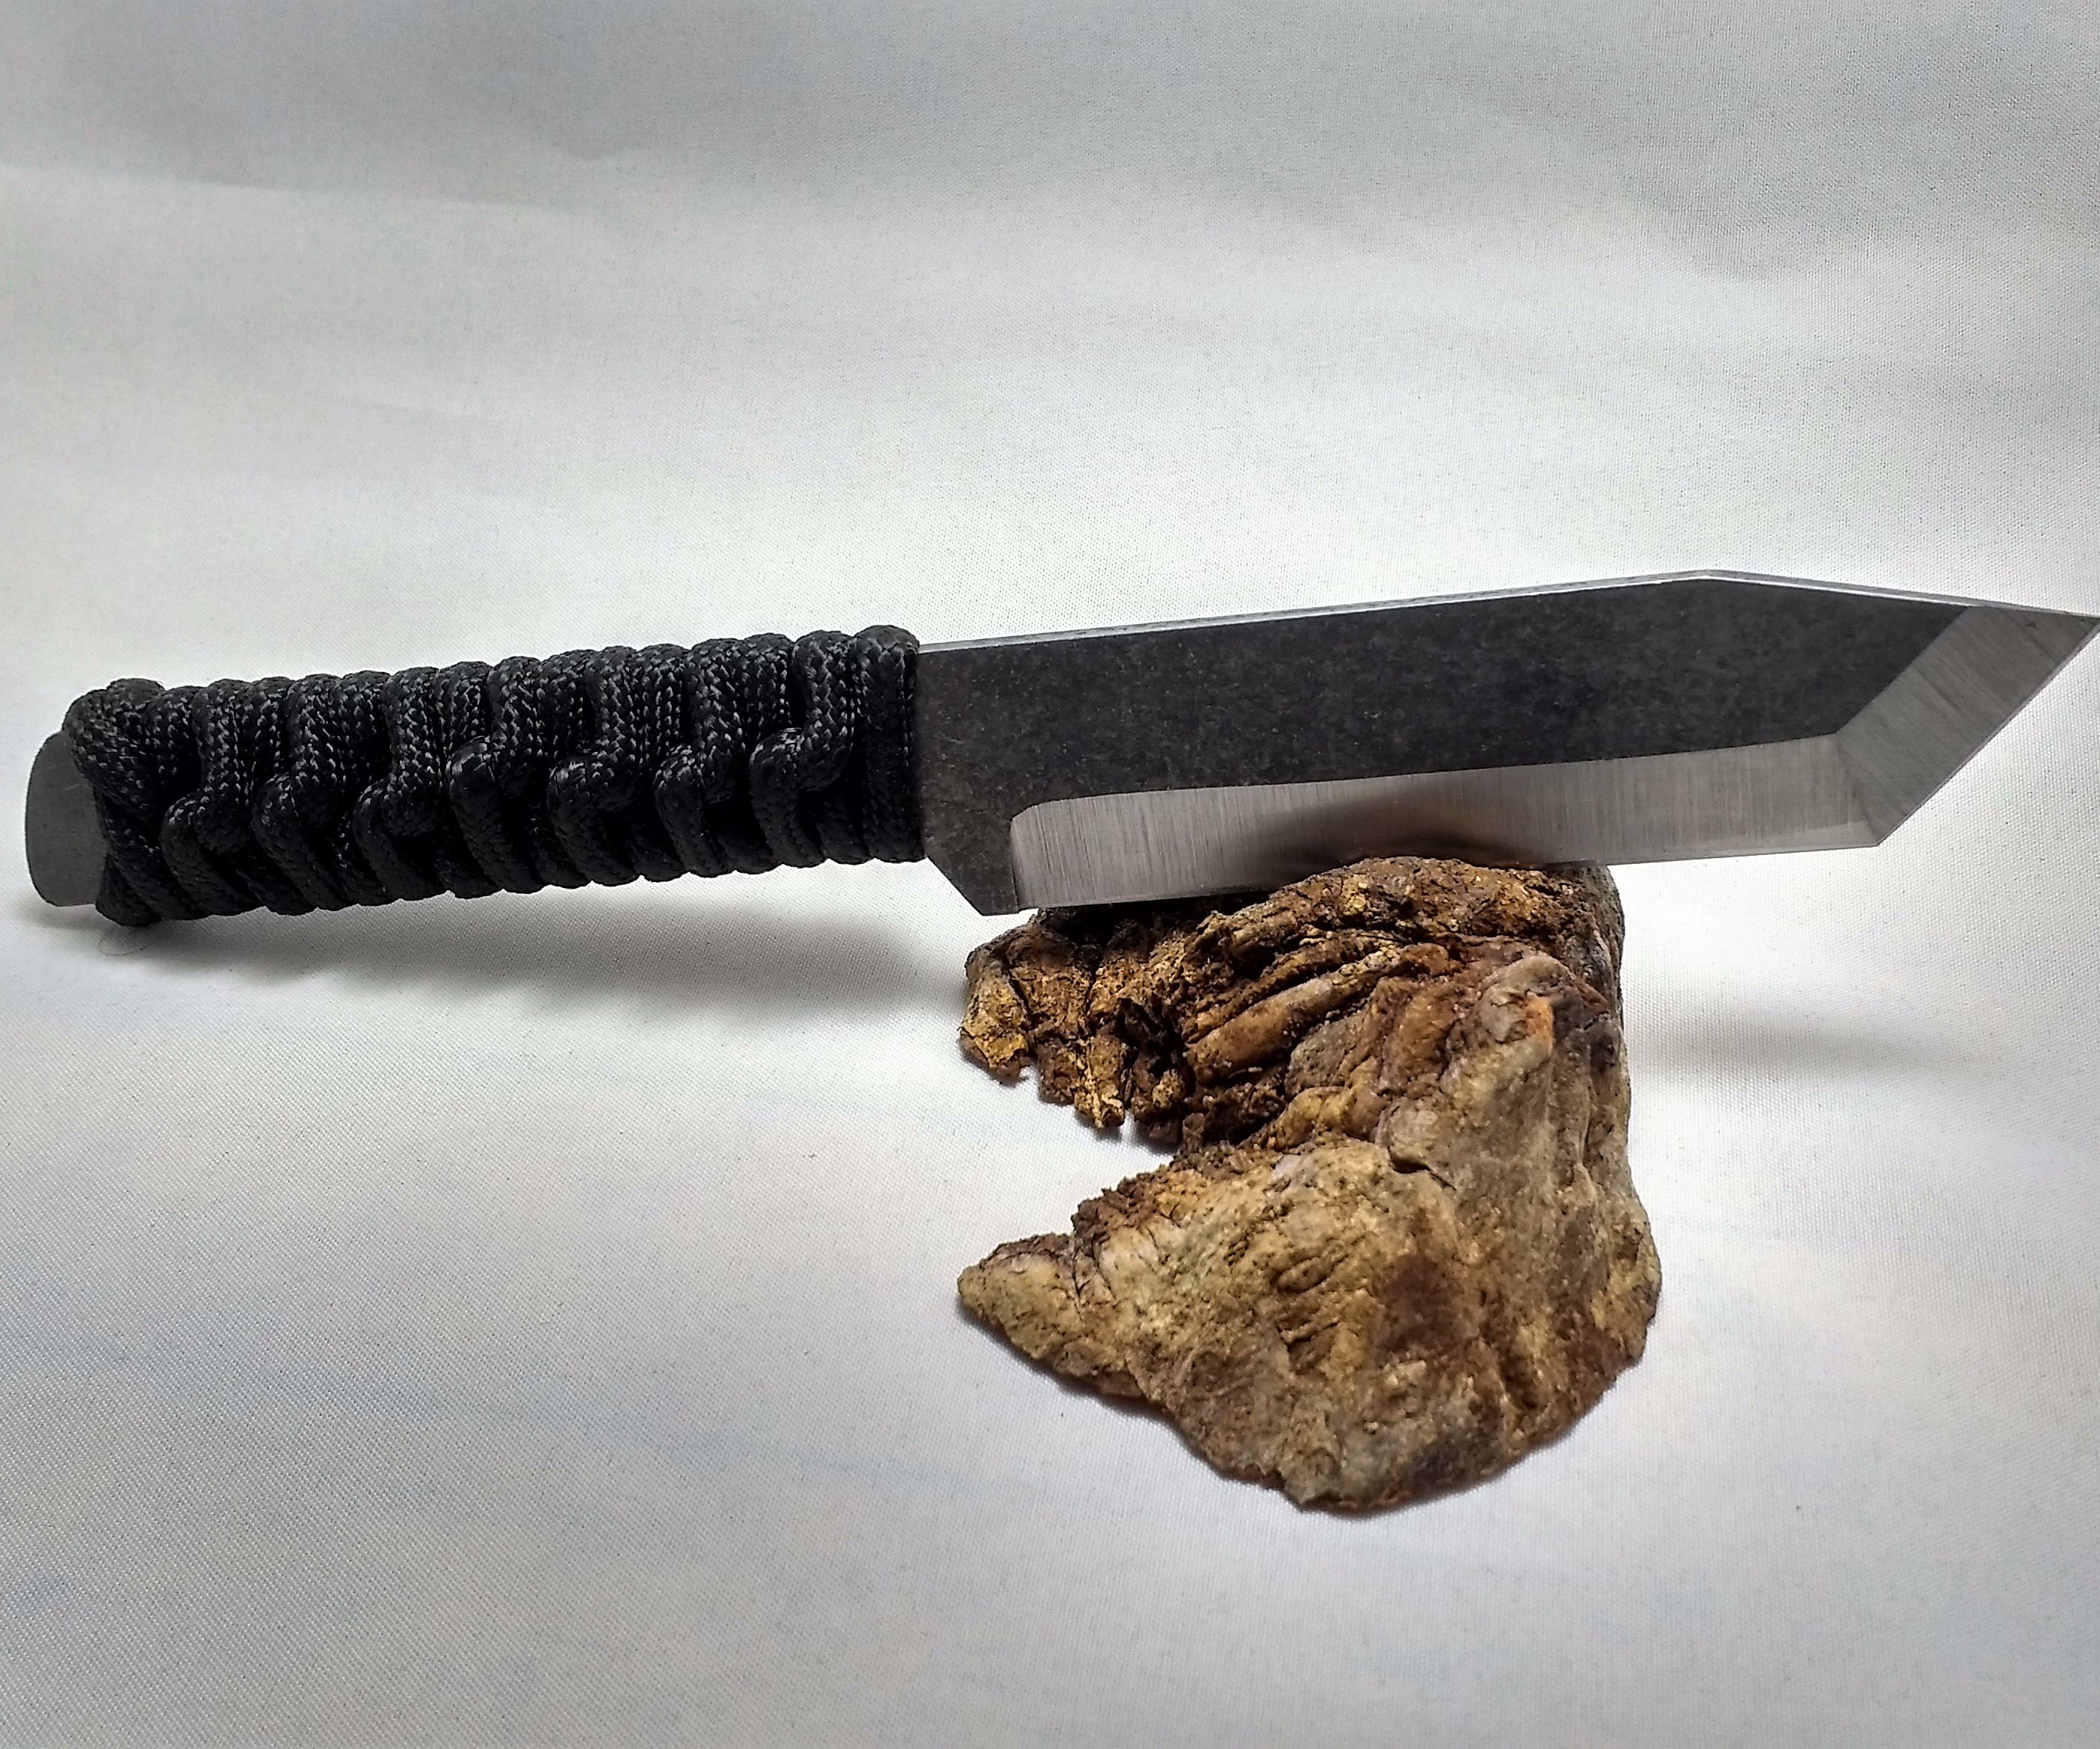 Making a Cord-Wrapped Tactical Knife